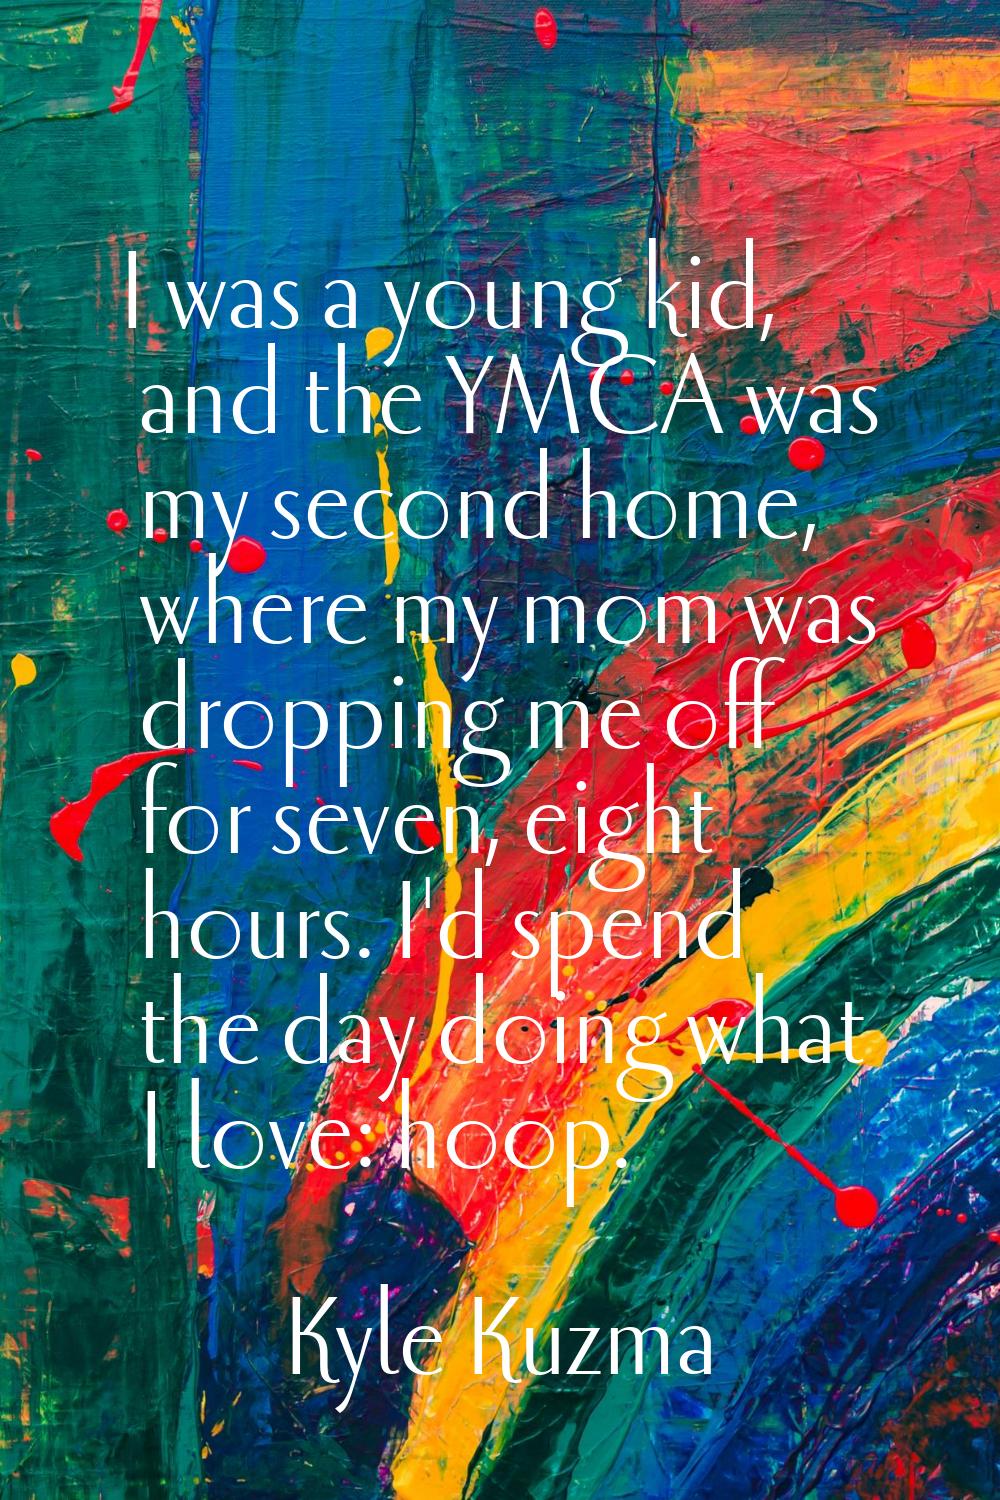 I was a young kid, and the YMCA was my second home, where my mom was dropping me off for seven, eig